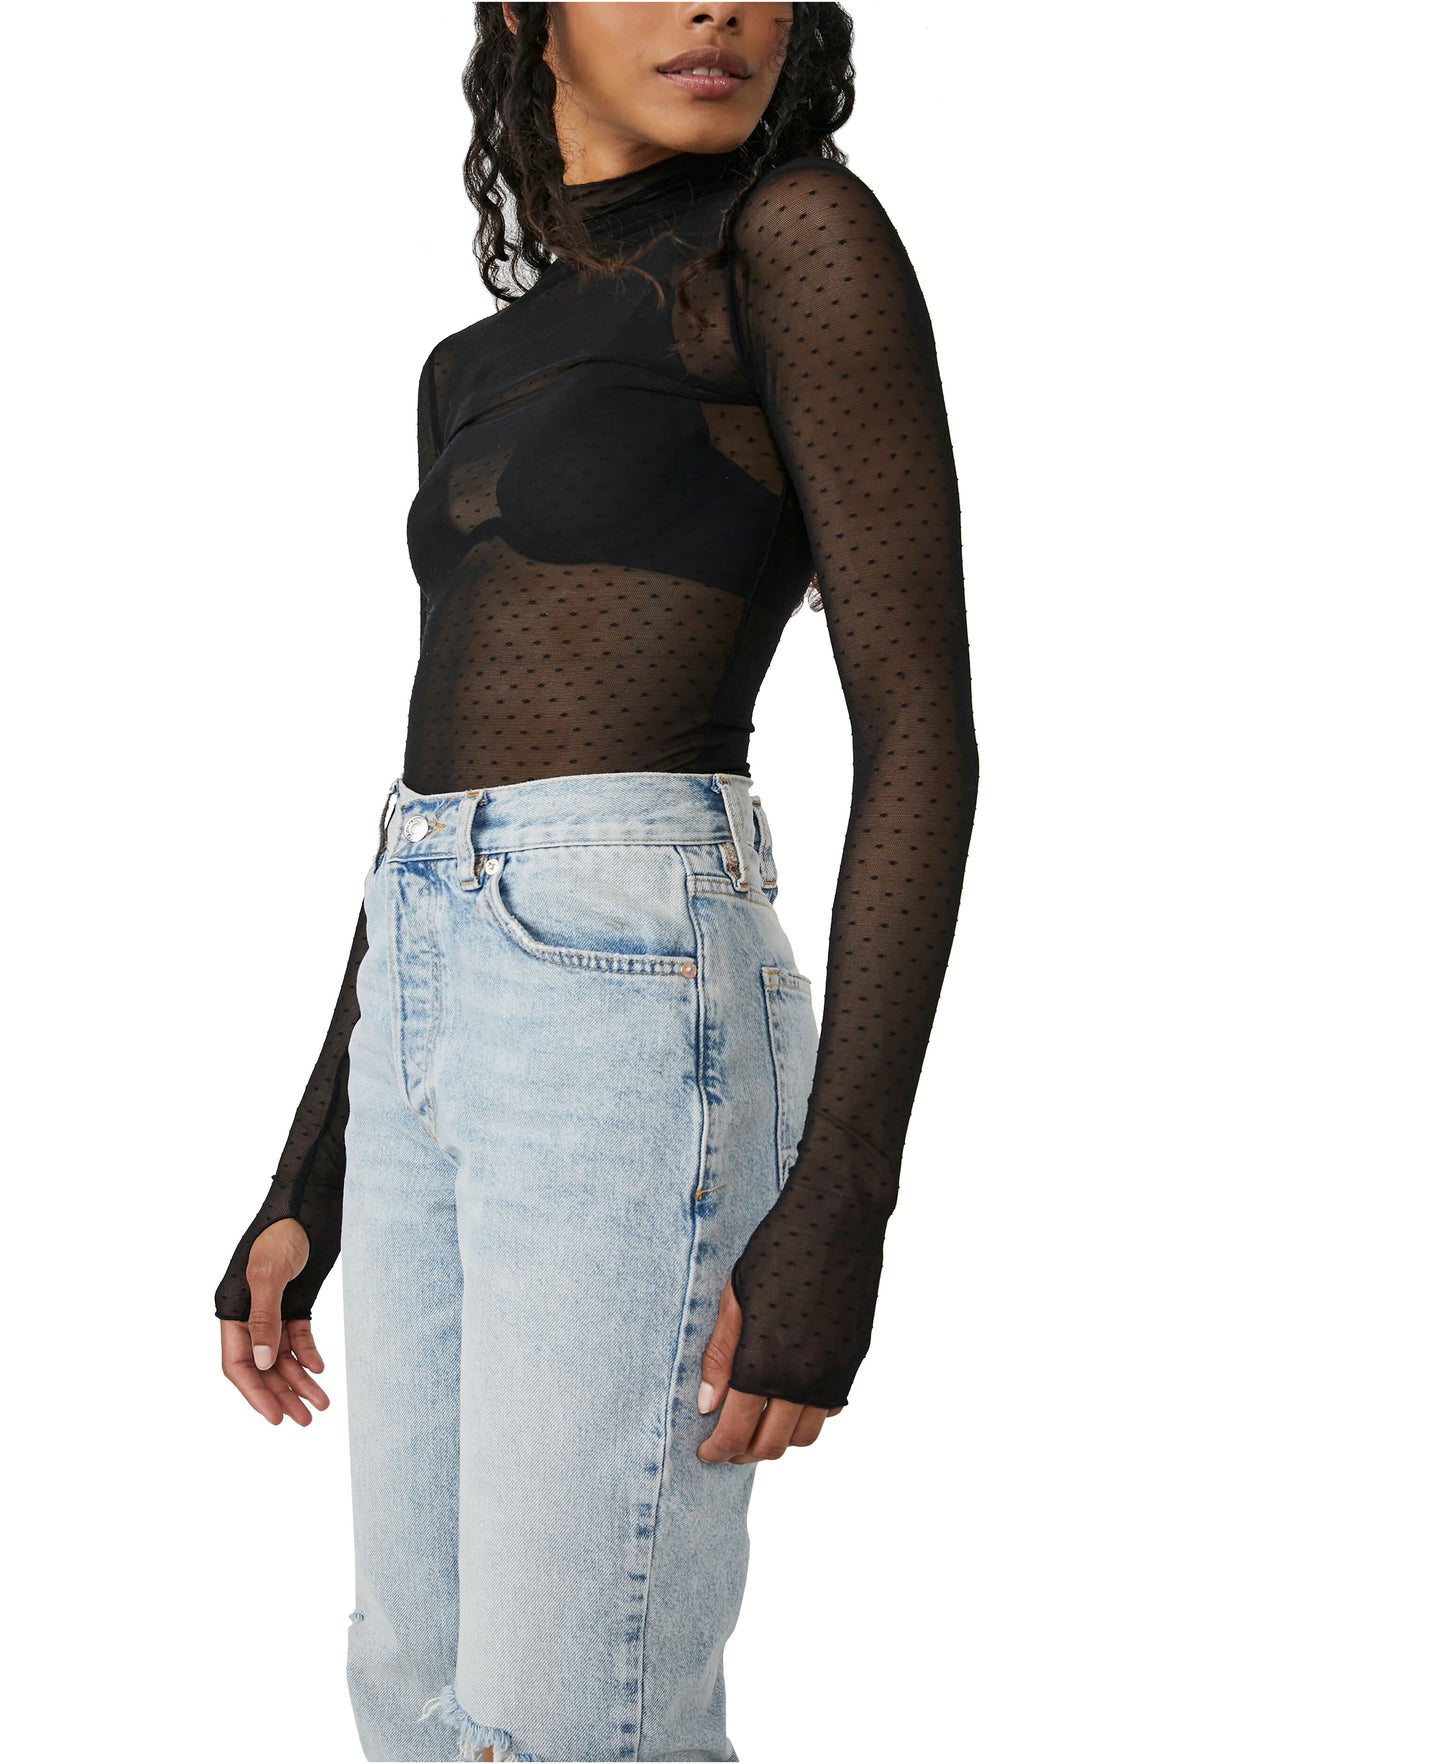 Free People On the Dot Layering Top